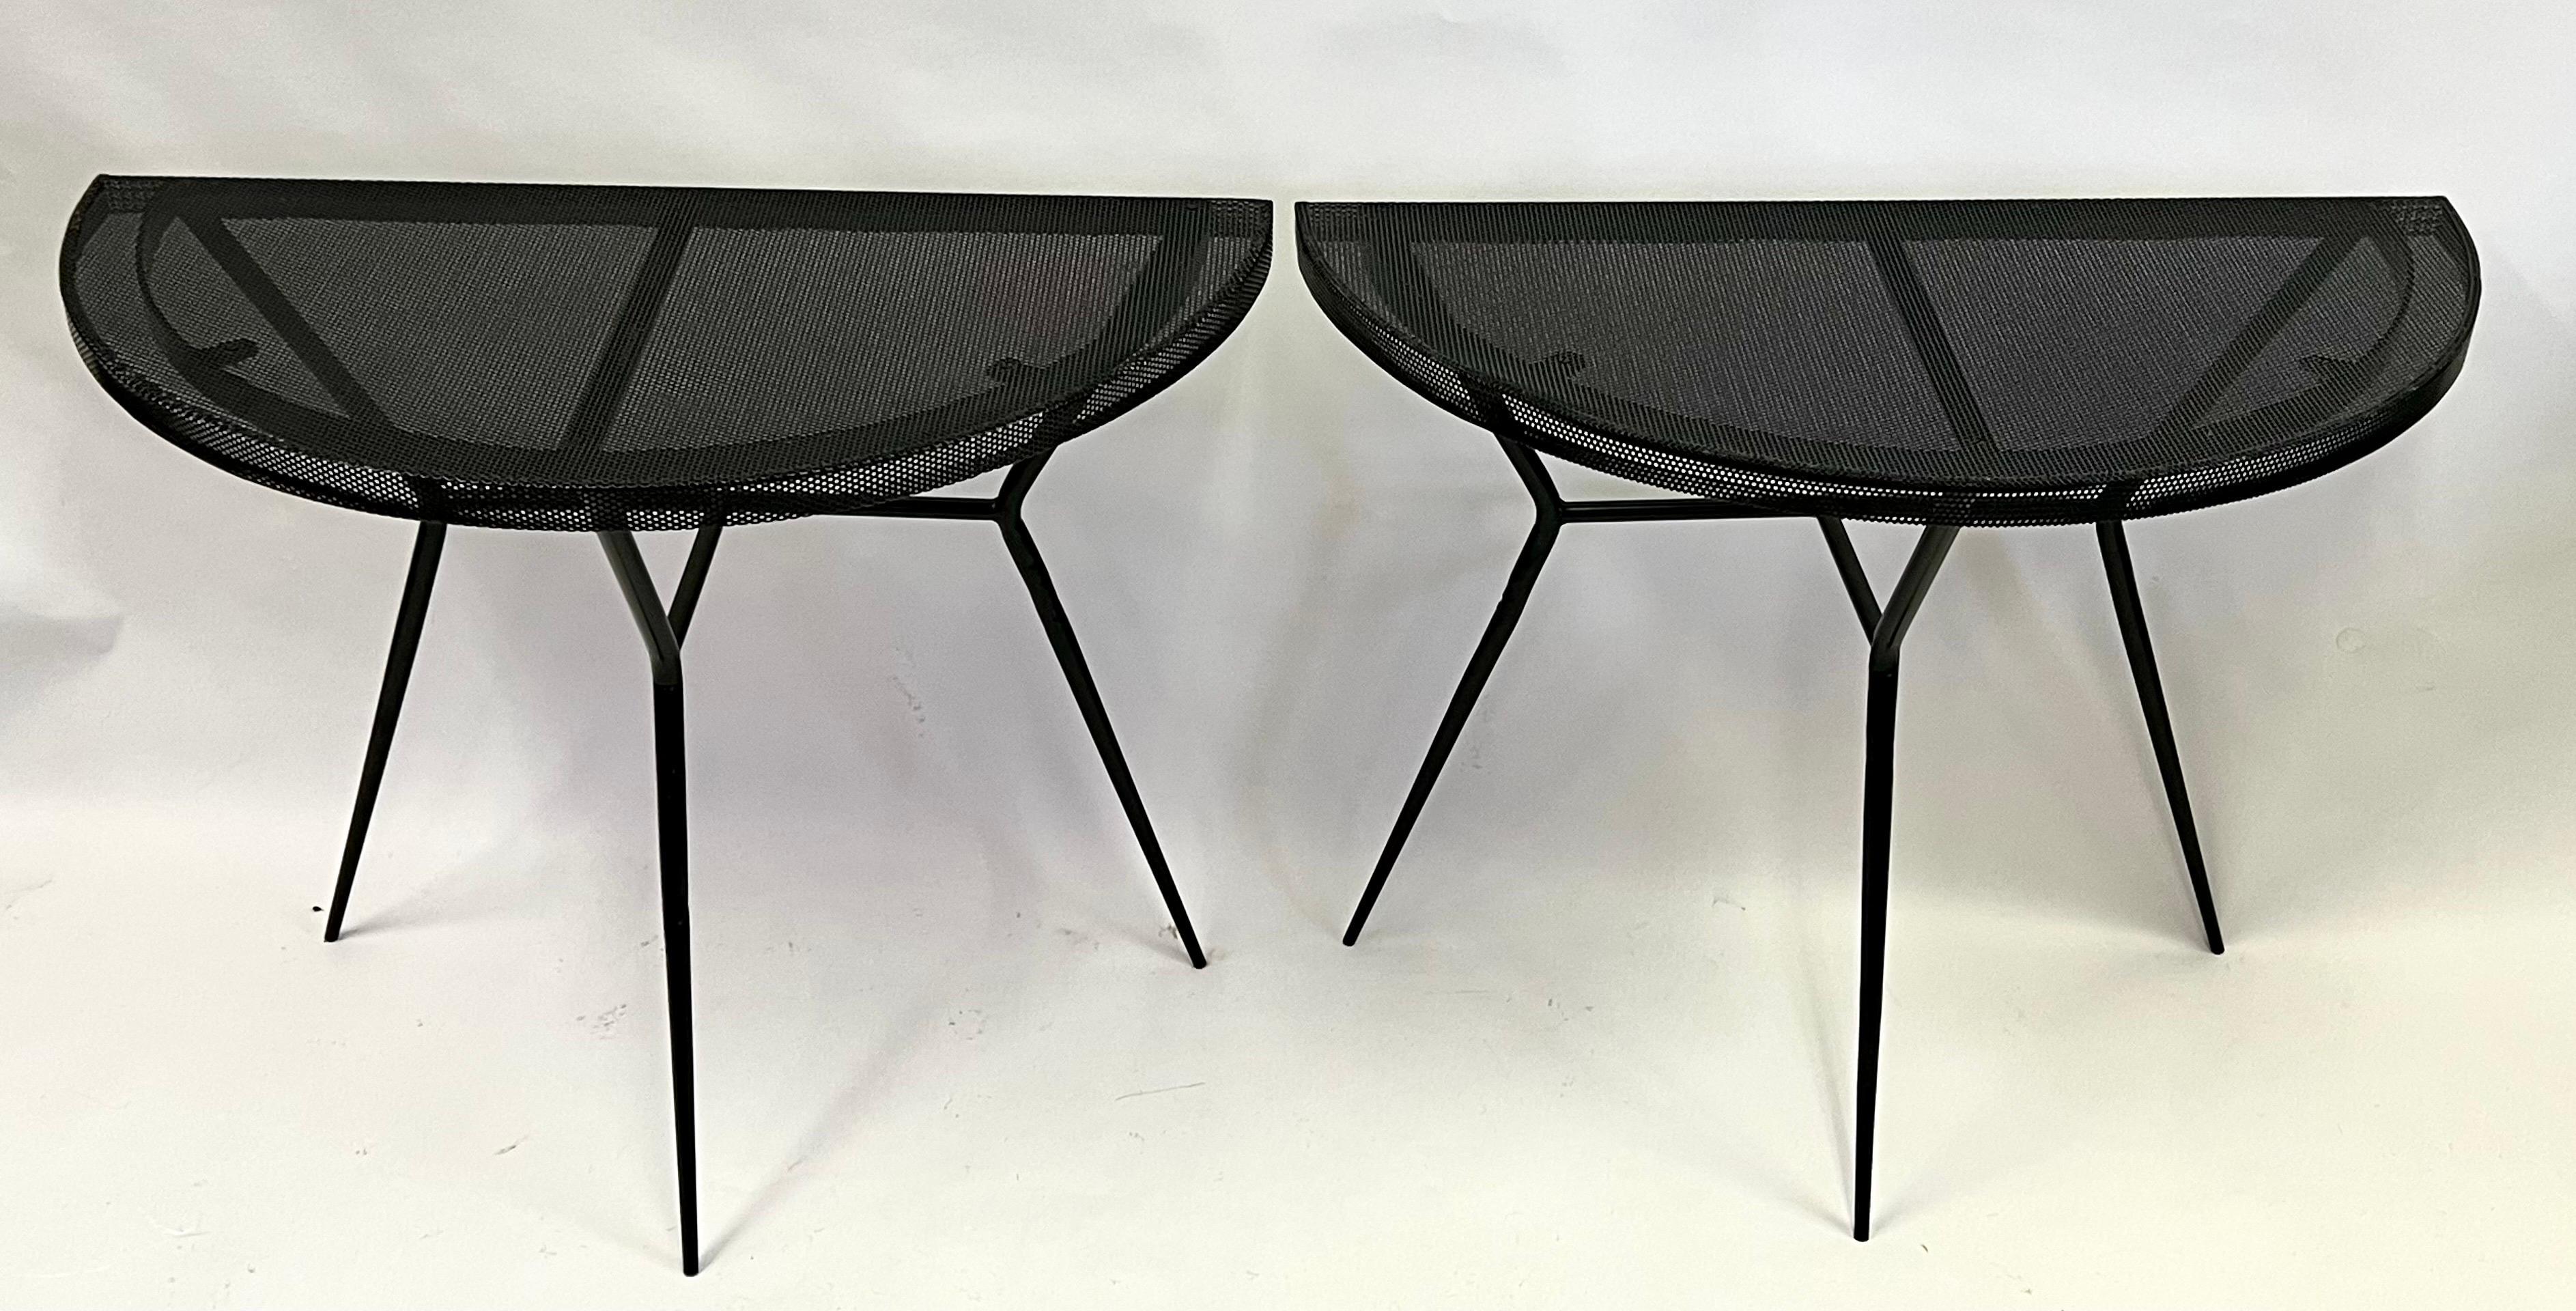 A rare and important pair of French Mid-Century Modern Consoles / Sofa Tables Attributed to Mathieu Mategot. The pieces are typical of Mategot and composed of perforated steel and enameled black; they are set upon architectural bases formed by 3